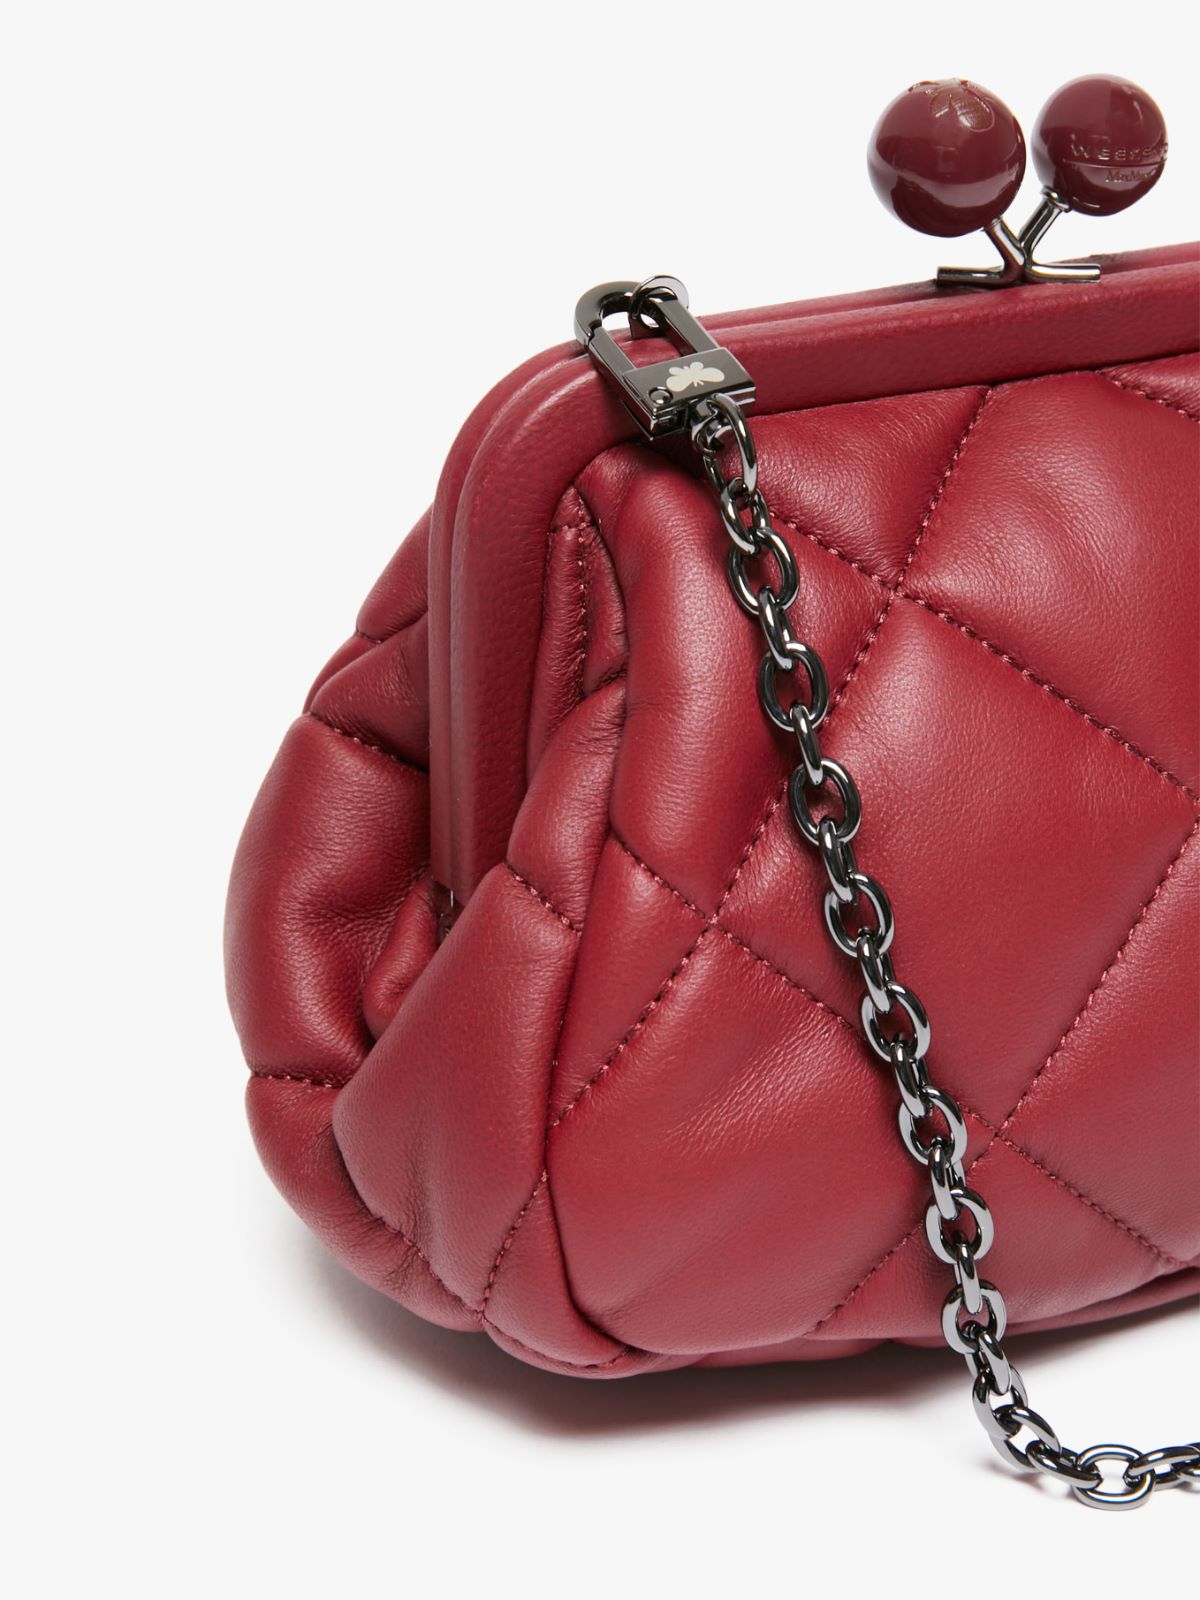 Small Pasticcino Bag in nappa leather - BORDEAUX - Weekend Max Mara - 4